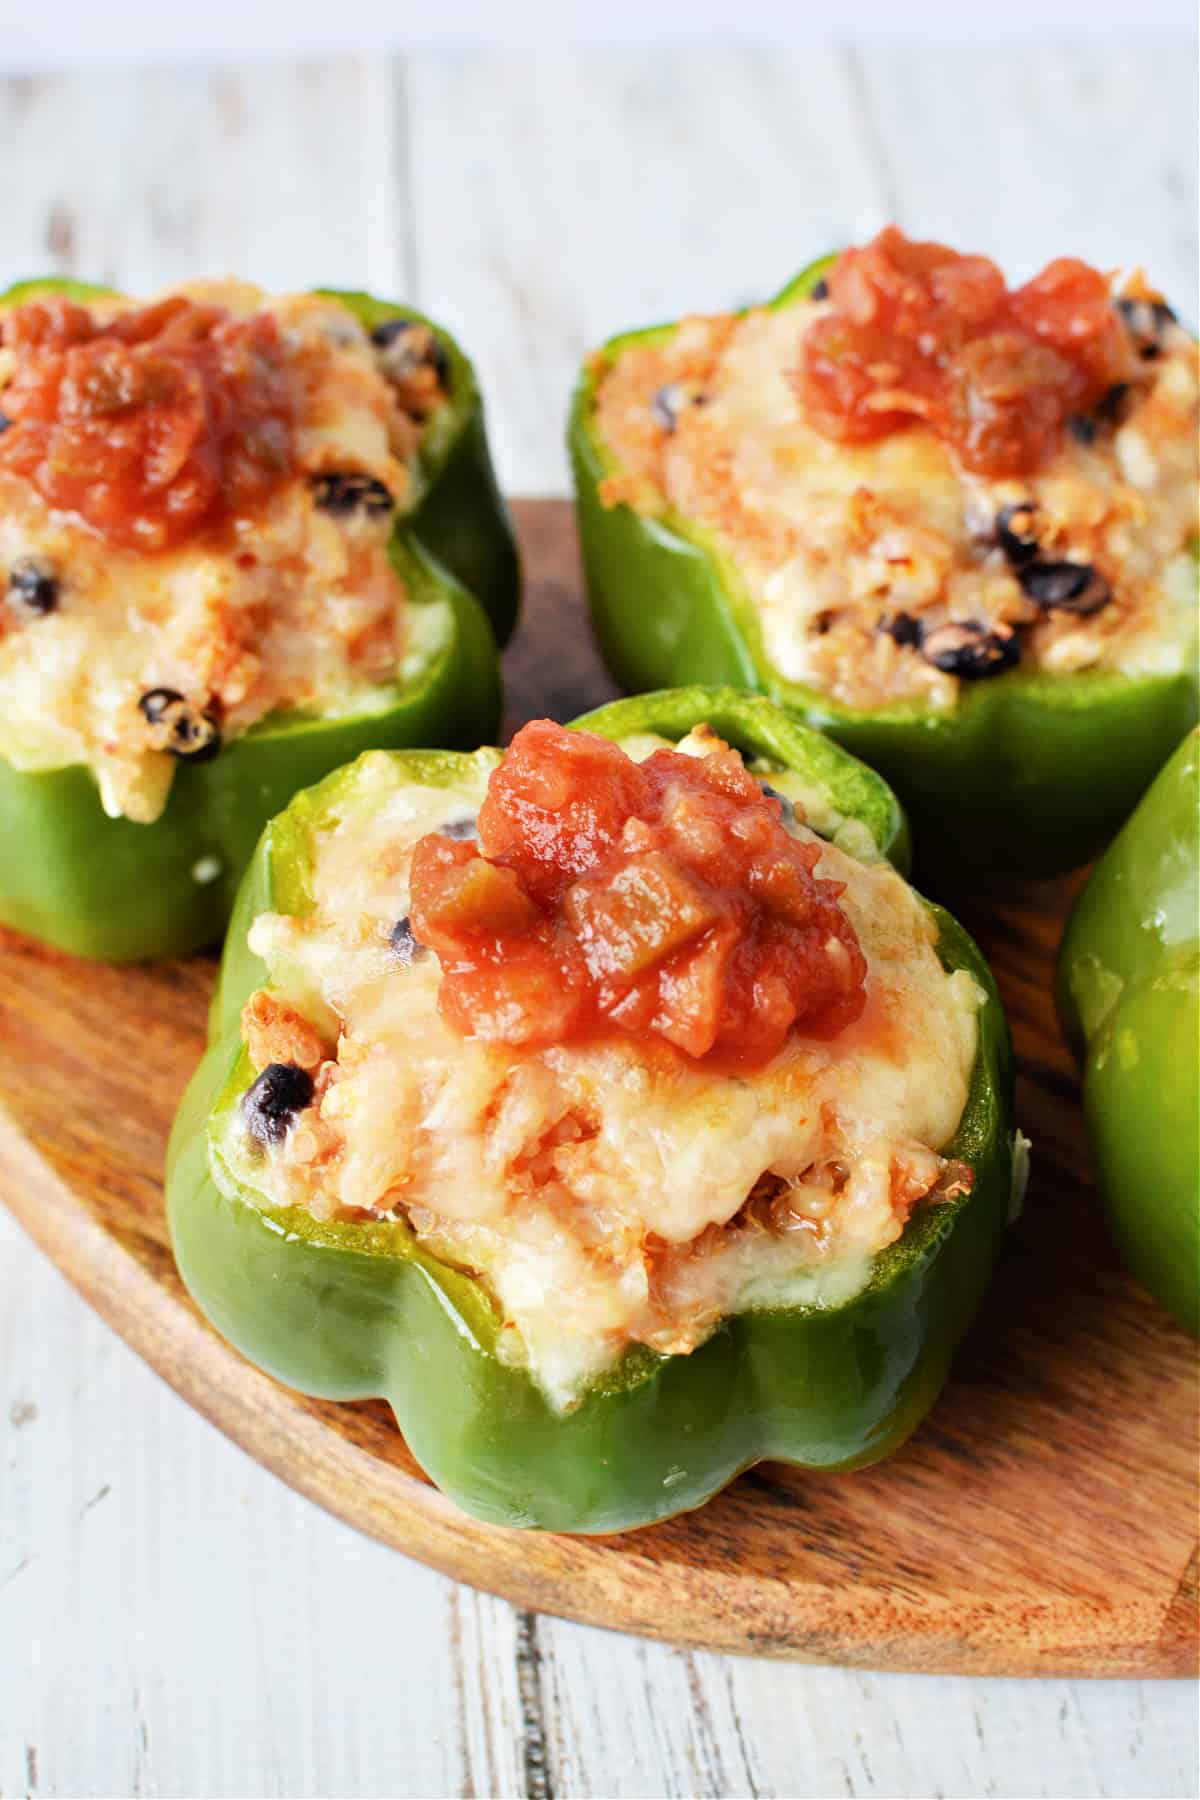 Stuffed Peppers With No Rice